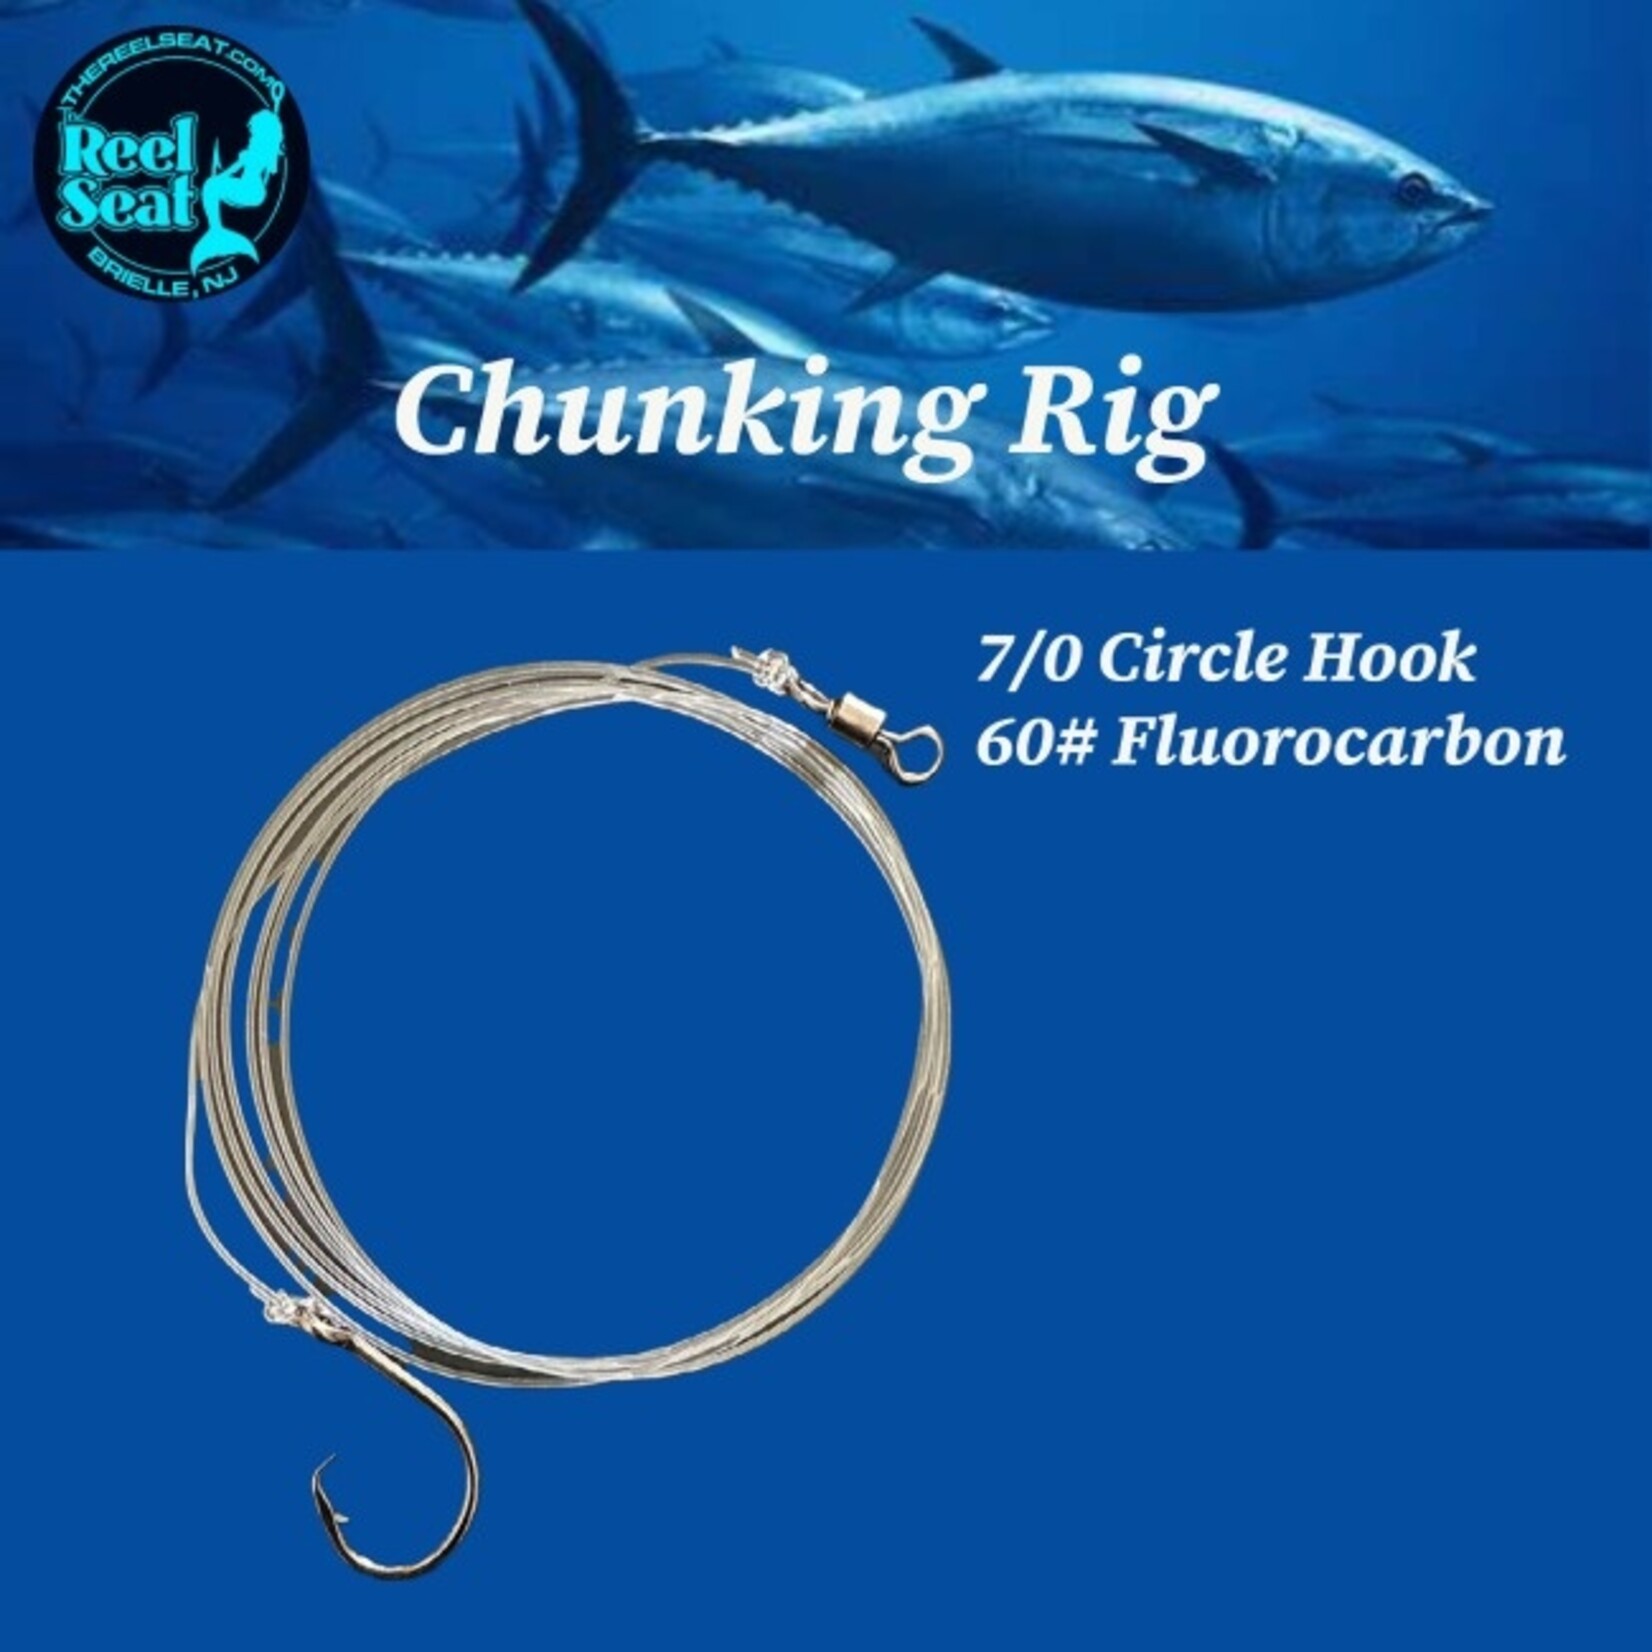 The Reel Seat RS Chunking Rig 7/0 circle hook on 60 lbs Fluoro